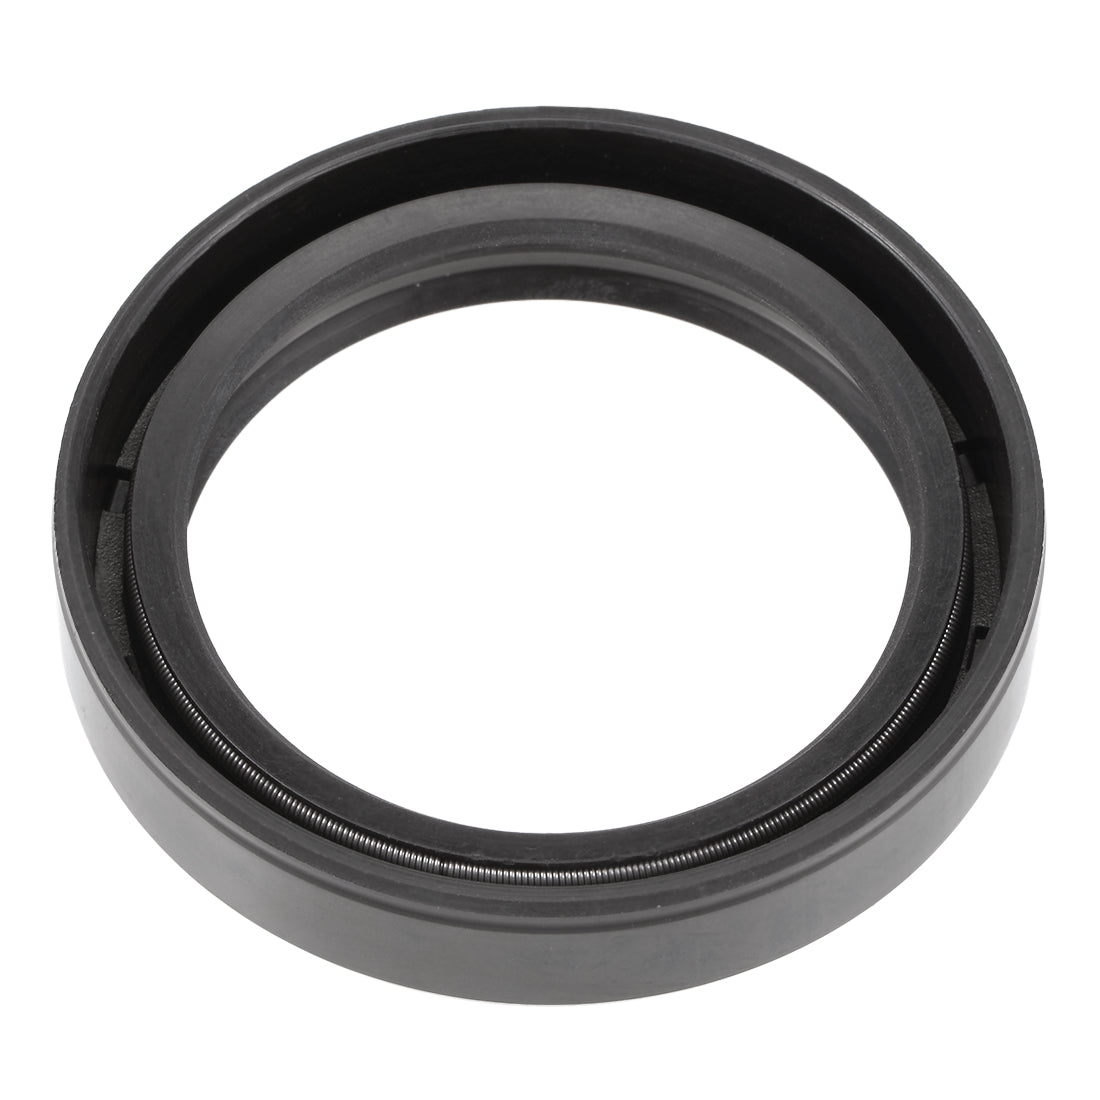 uxcell Uxcell Oil Seal, TC 40mm x 52mm x 10mm, Nitrile Rubber Cover Double Lip